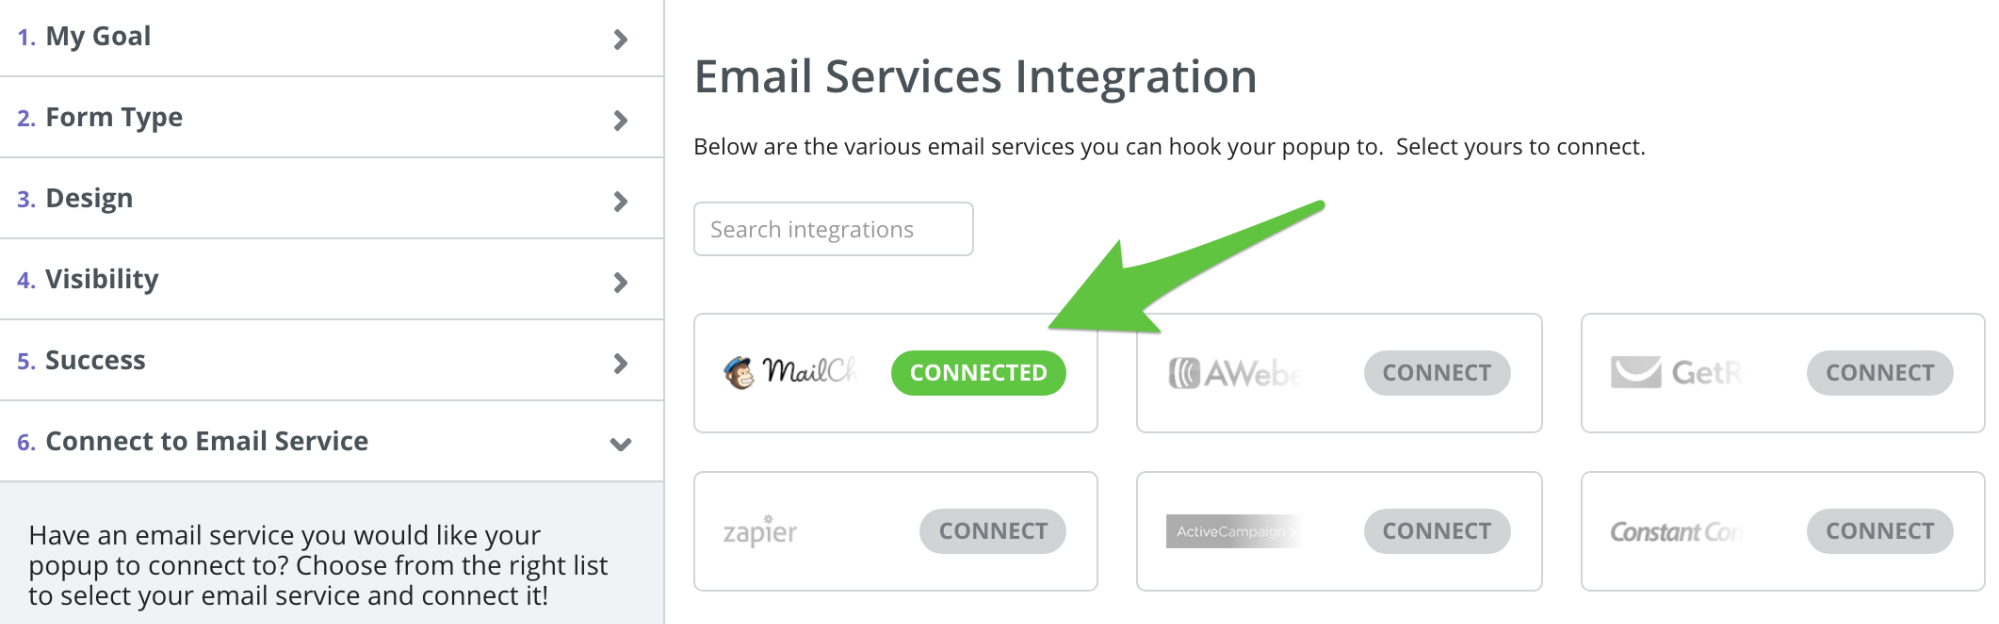 Screenshot showing email services integration page for a sumo popup